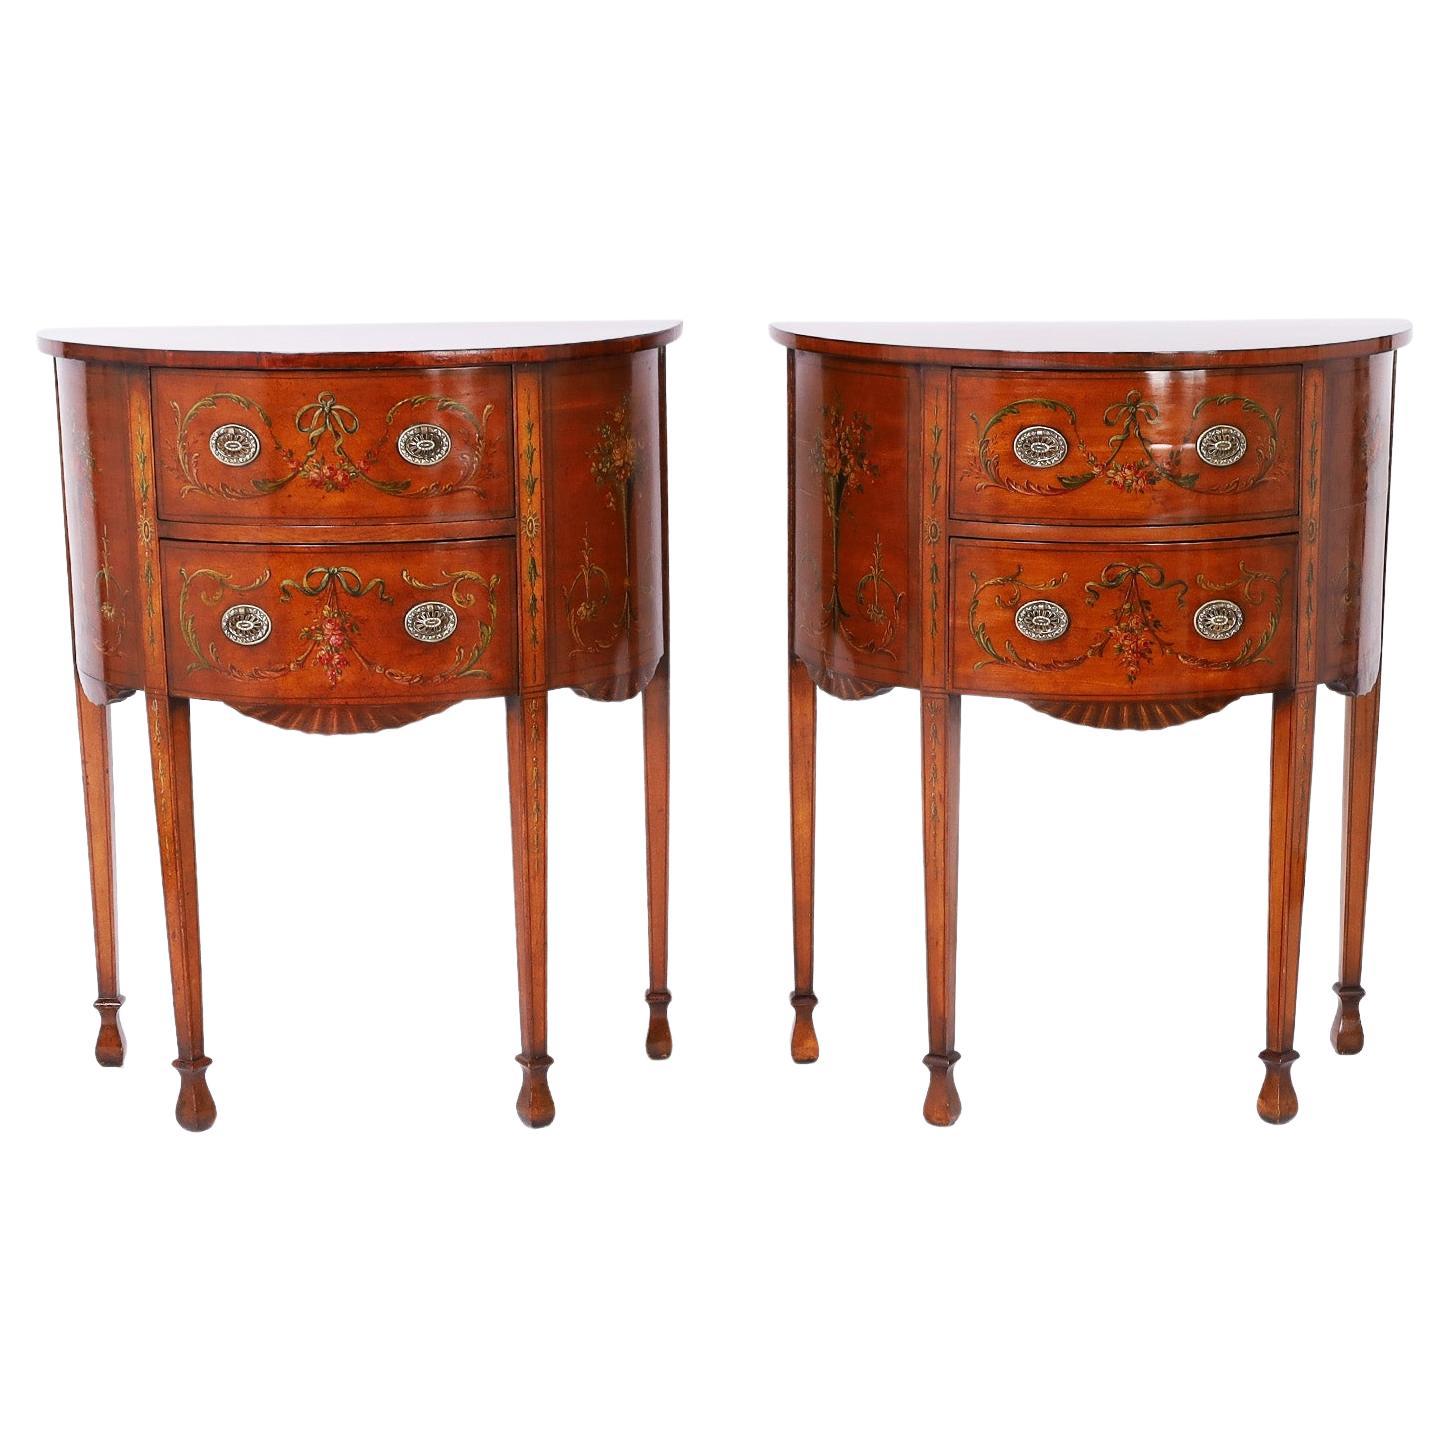 Pair of Edwardian or Adams Style Demi Lune Tables or Stands For Sale